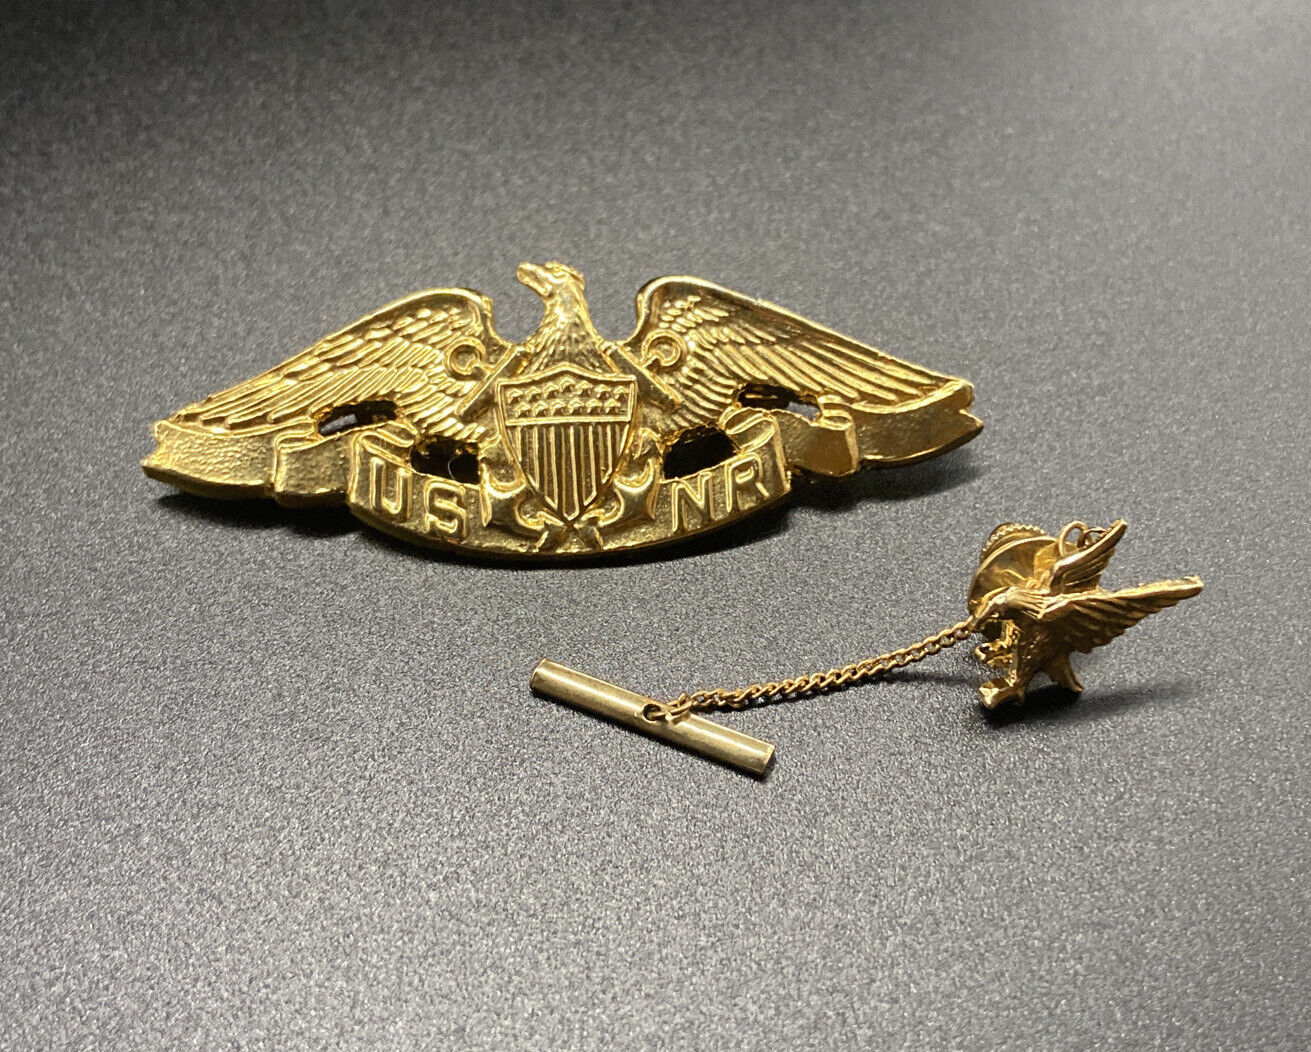 USA NAVY Reserve Vanguard NY US NR Pin With American Eagle Tie/Lapel Pin